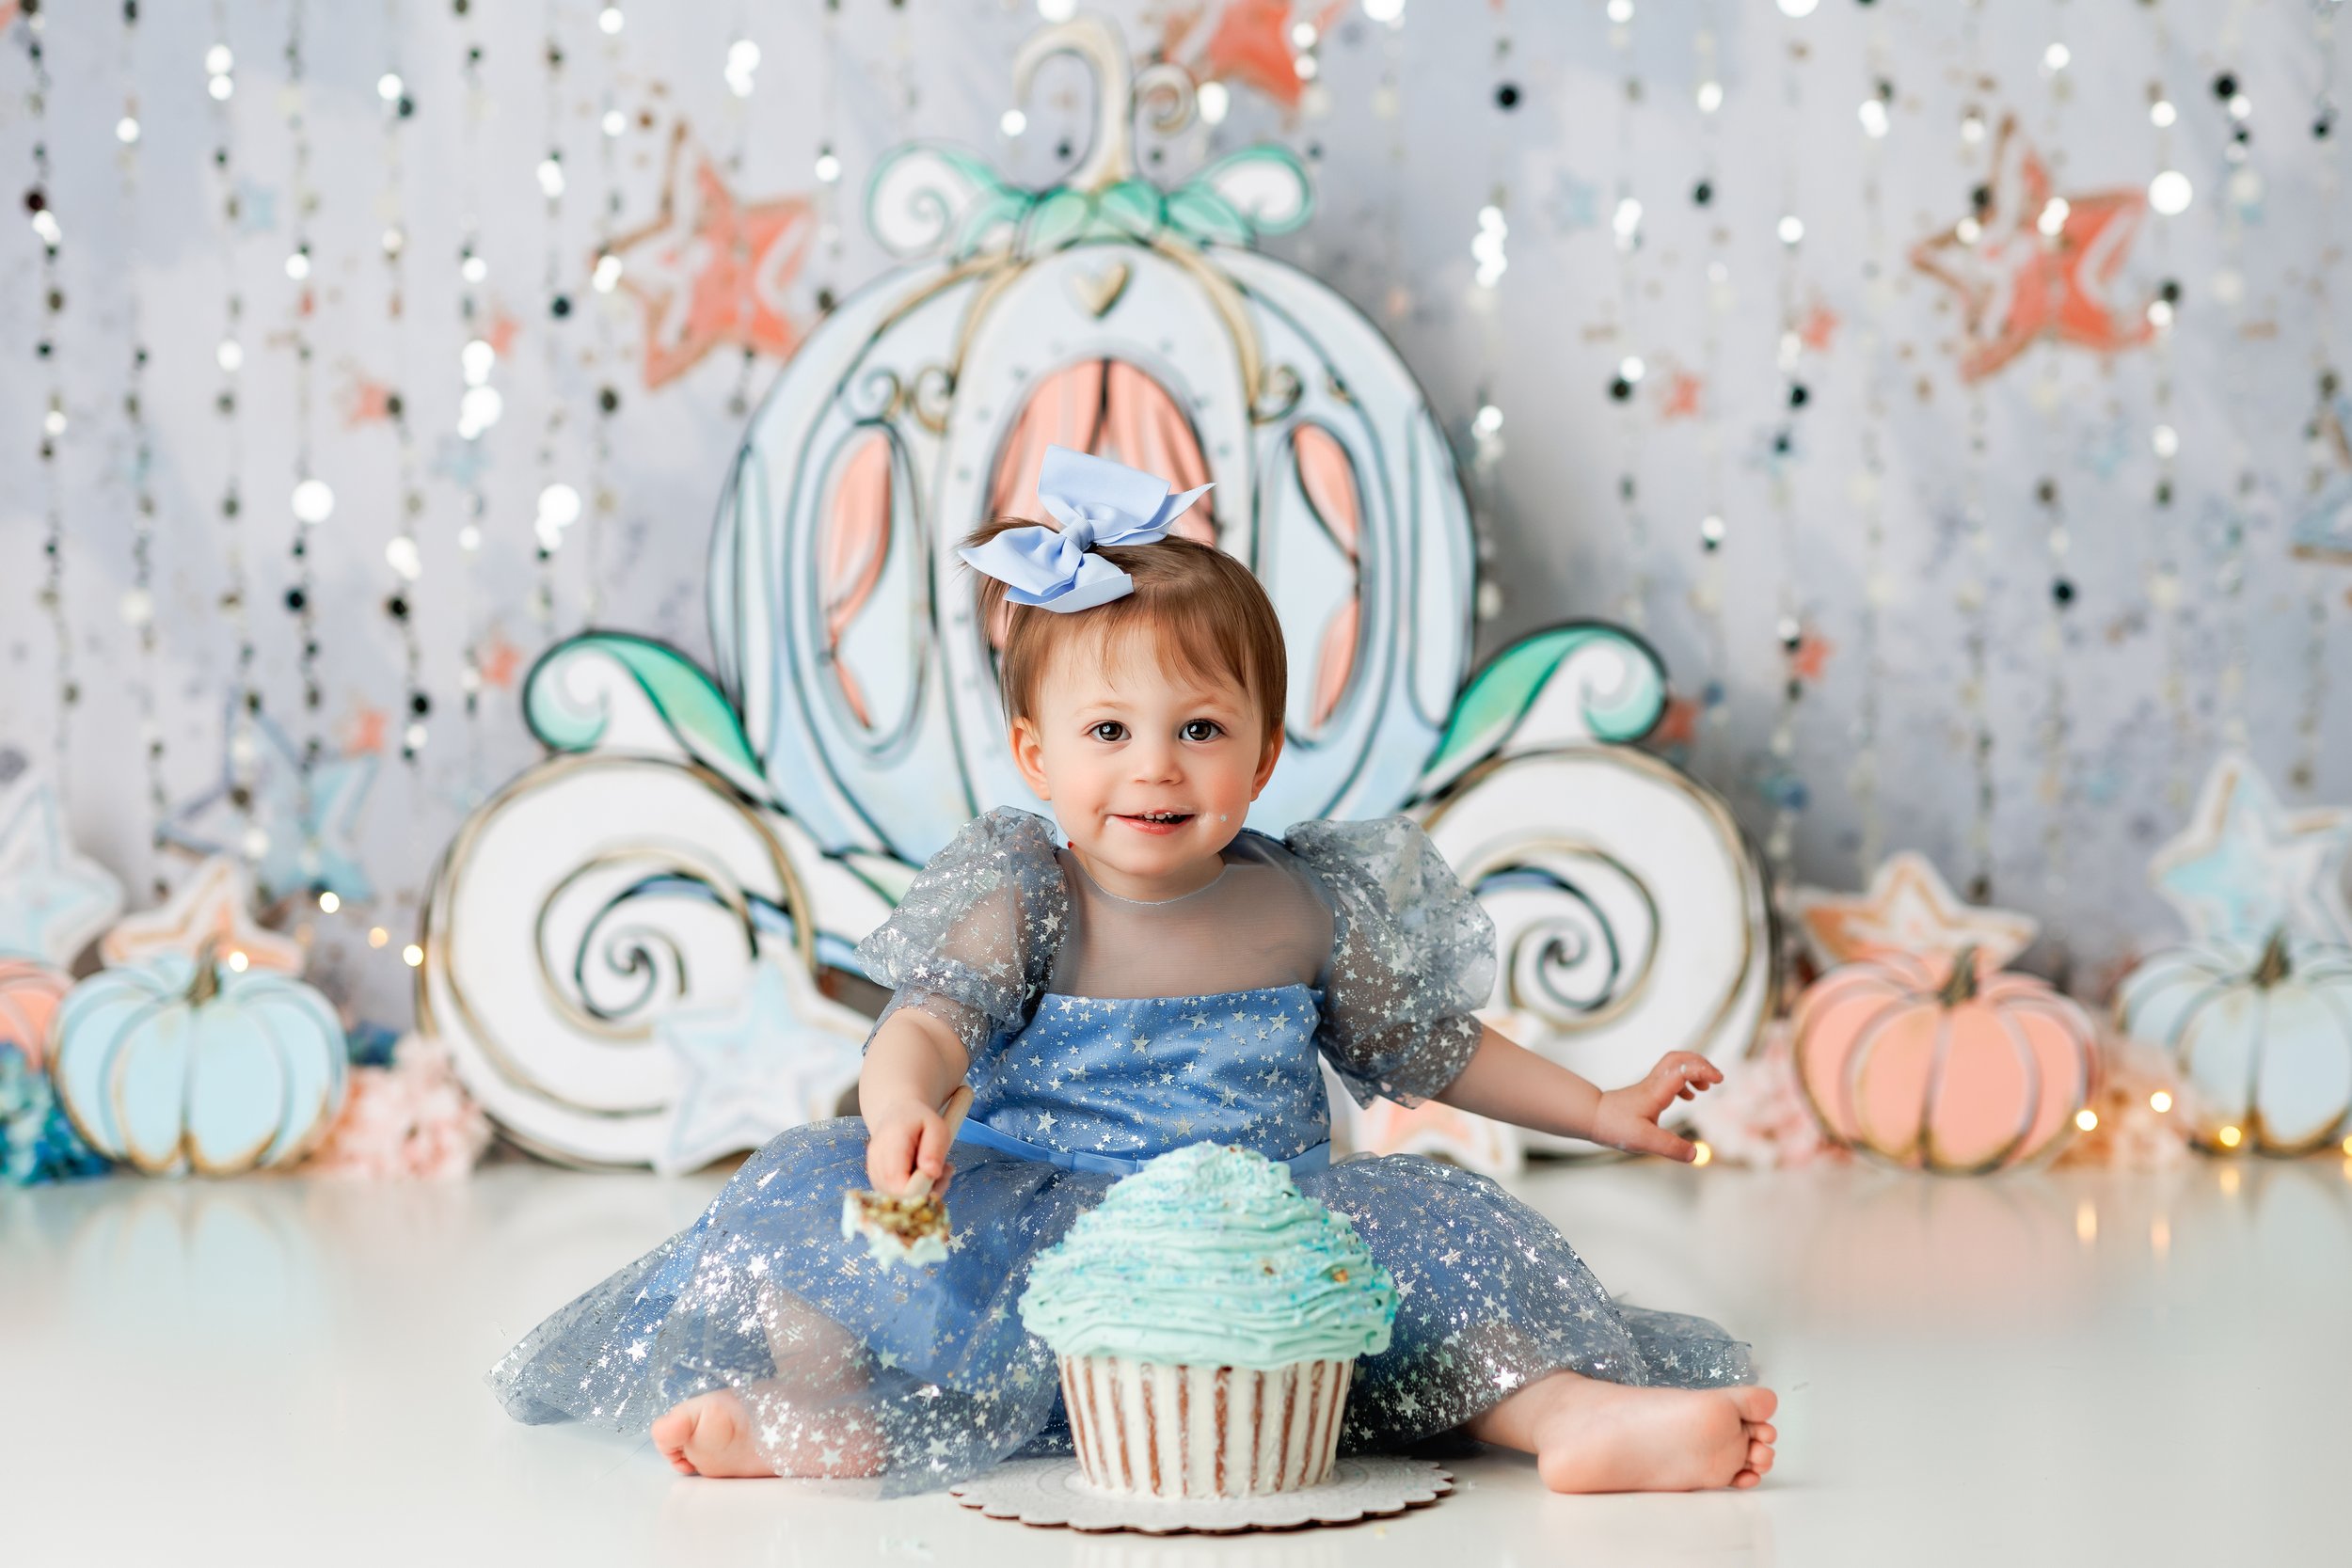  Baby girl in blue dress eating her cake with a carriage in the background during her Cinderella themed birthday photoshoot 